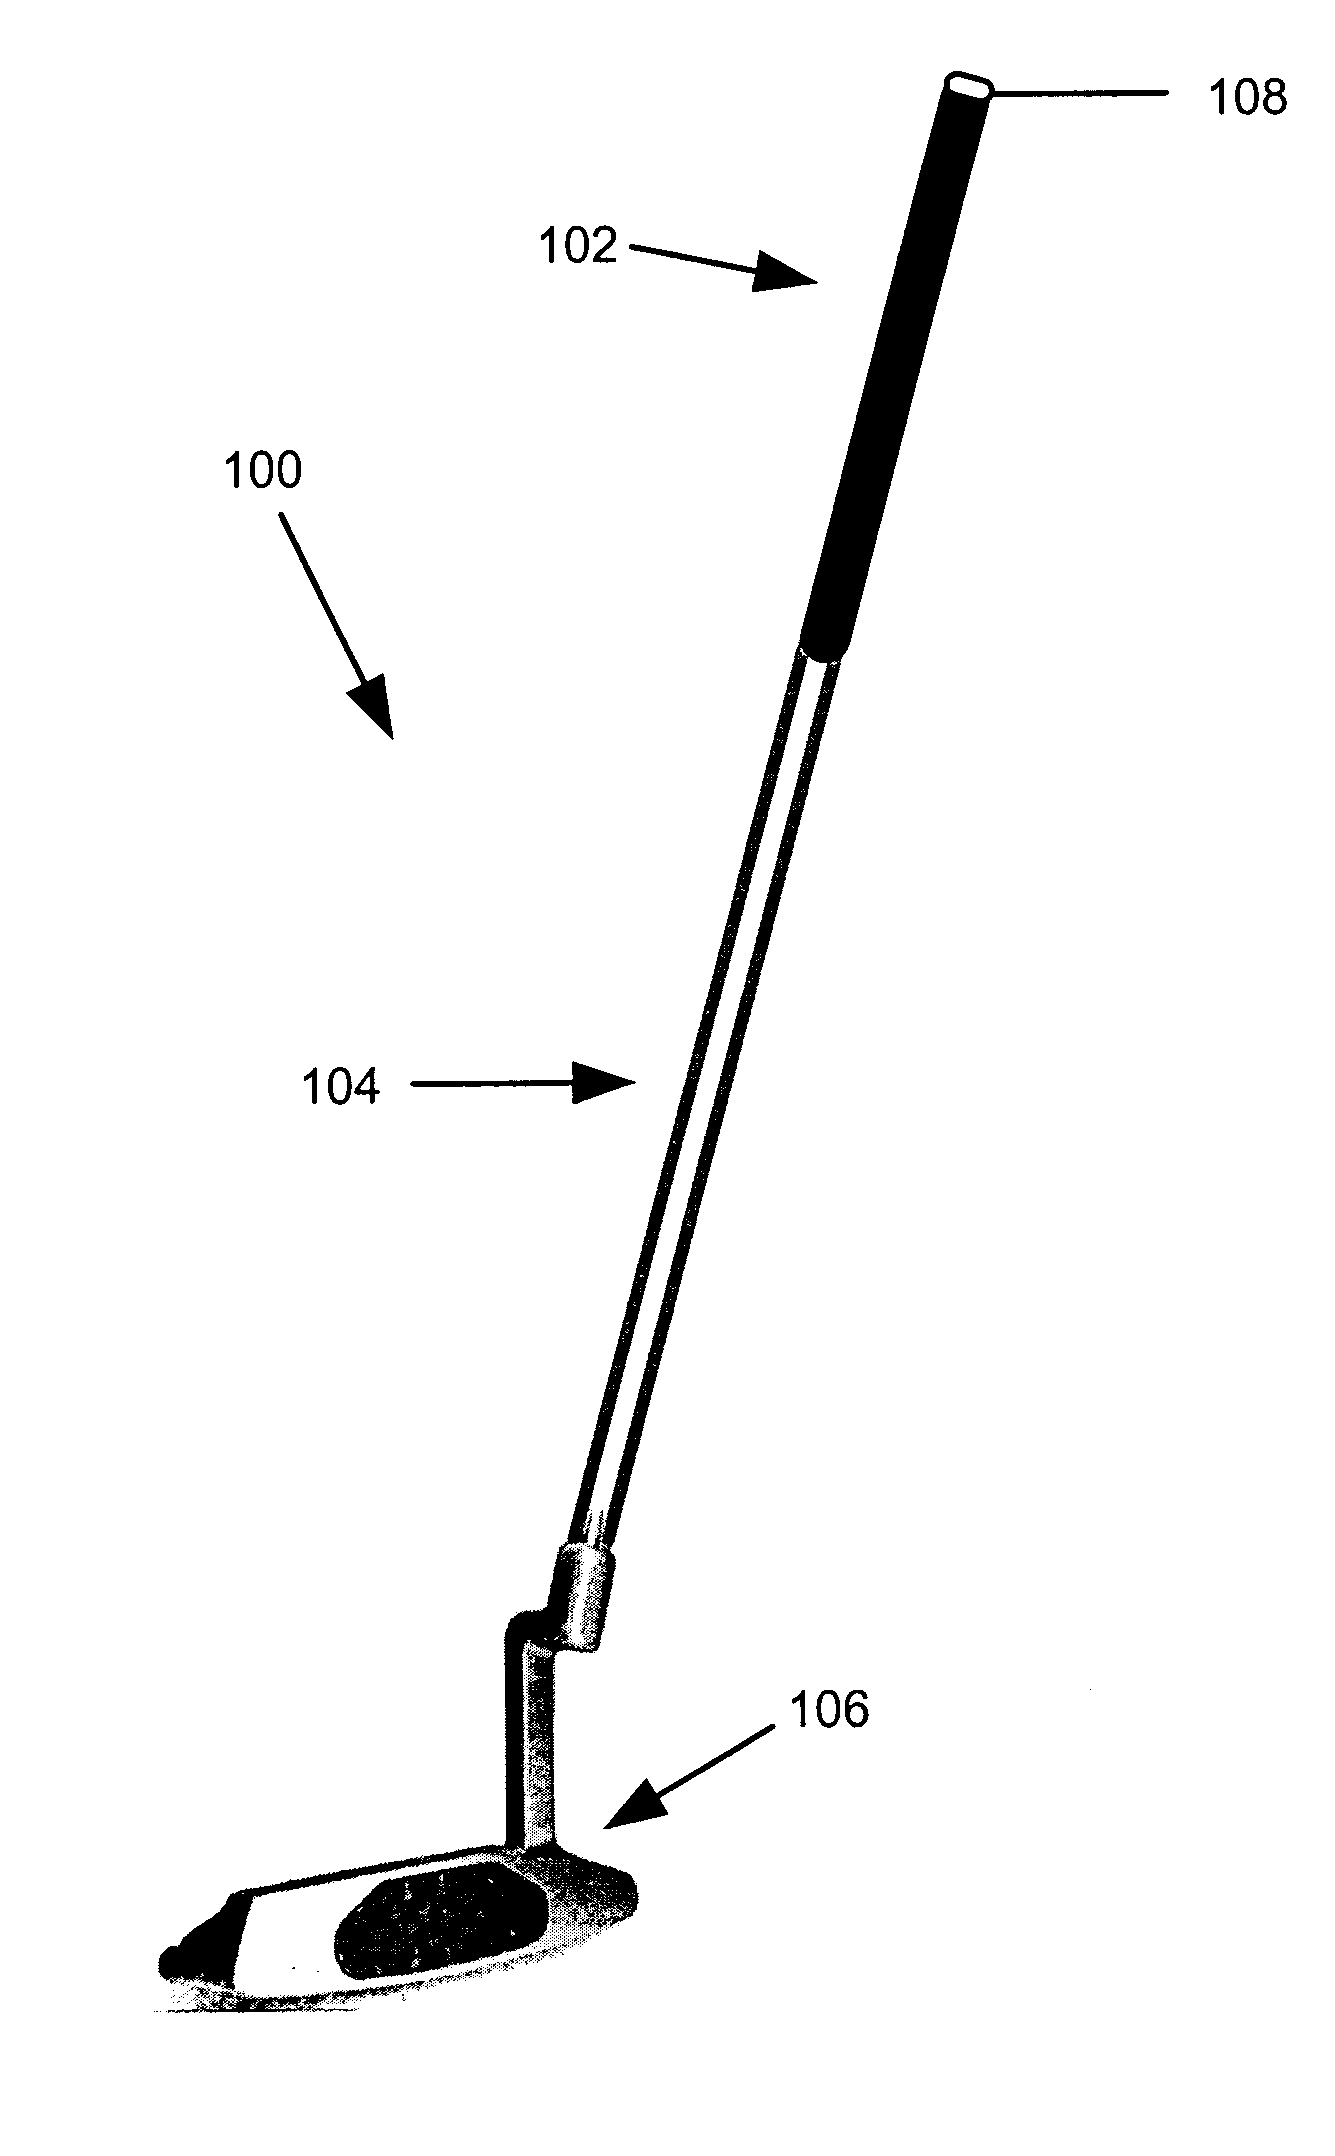 Golf club with embedded inertial measurement unit and processing